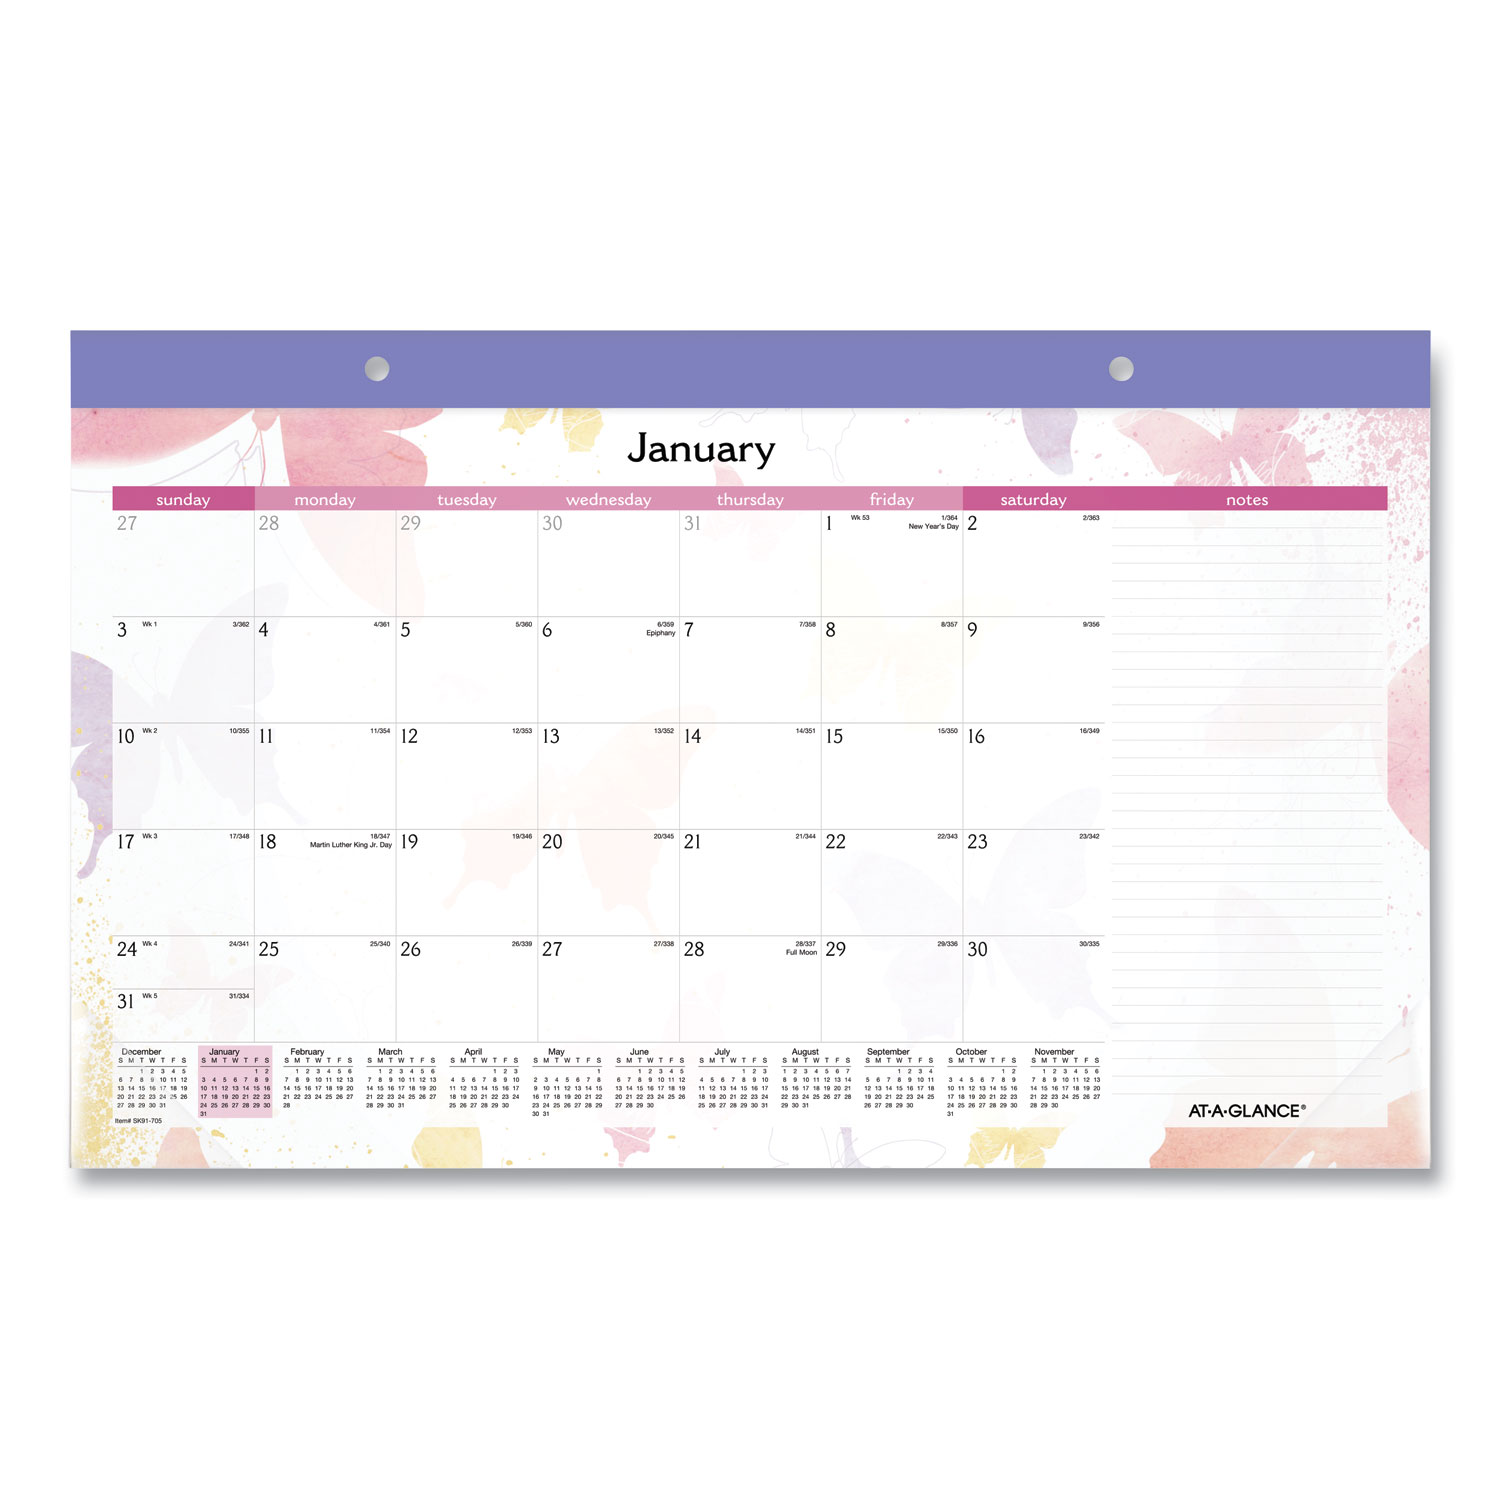  AT-A-GLANCE SK91-705 Watercolors Recycled Monthly Desk Pad Calendar, 17.75 x 10.88, 2020 (AAGSK91705) 